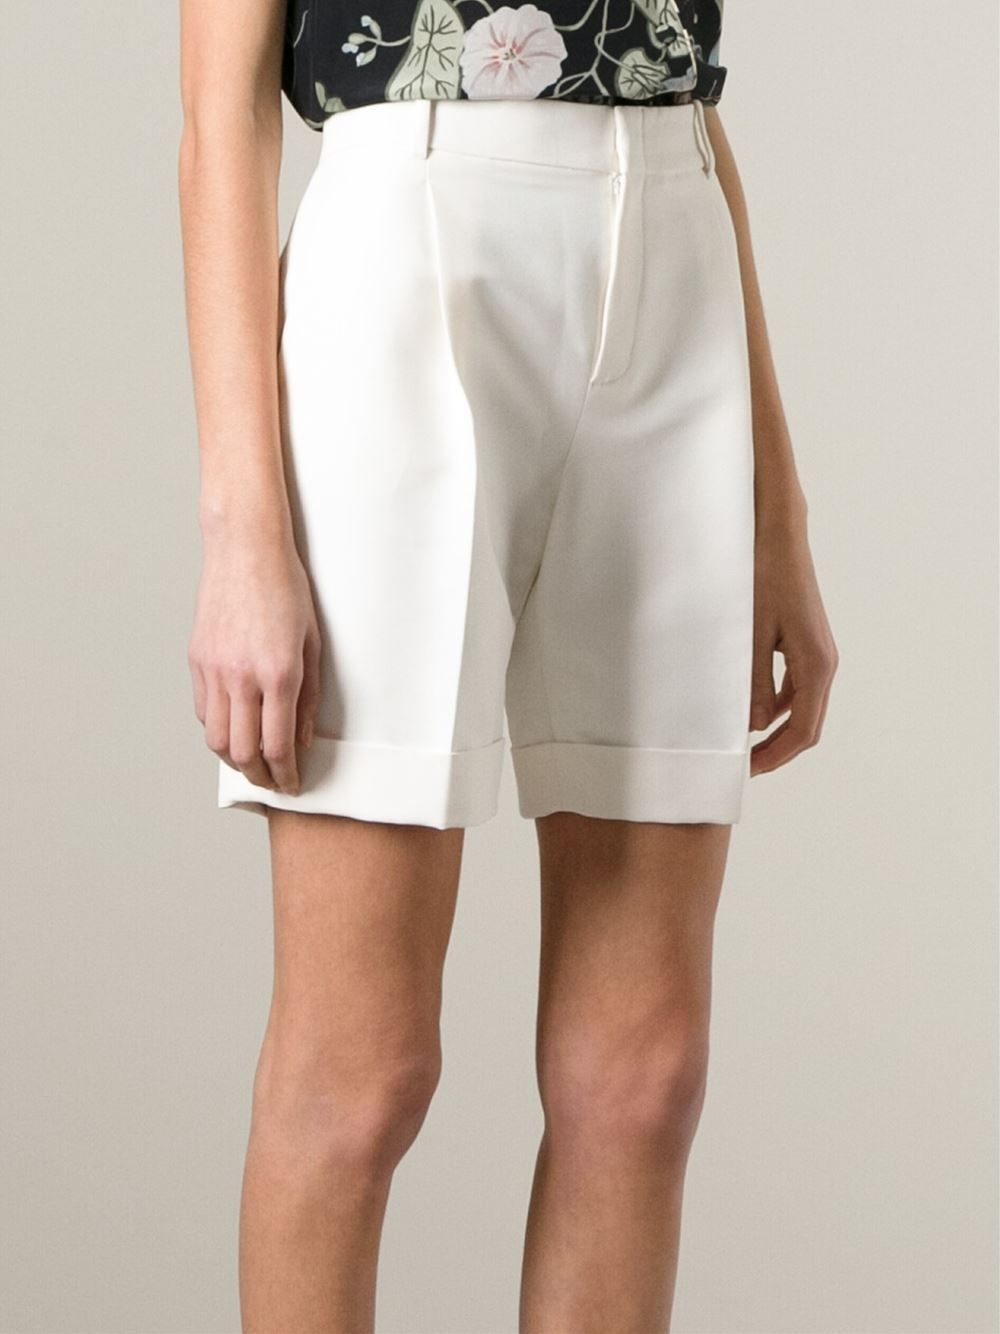 Gucci Pleated Bermuda Shorts in White - Lyst